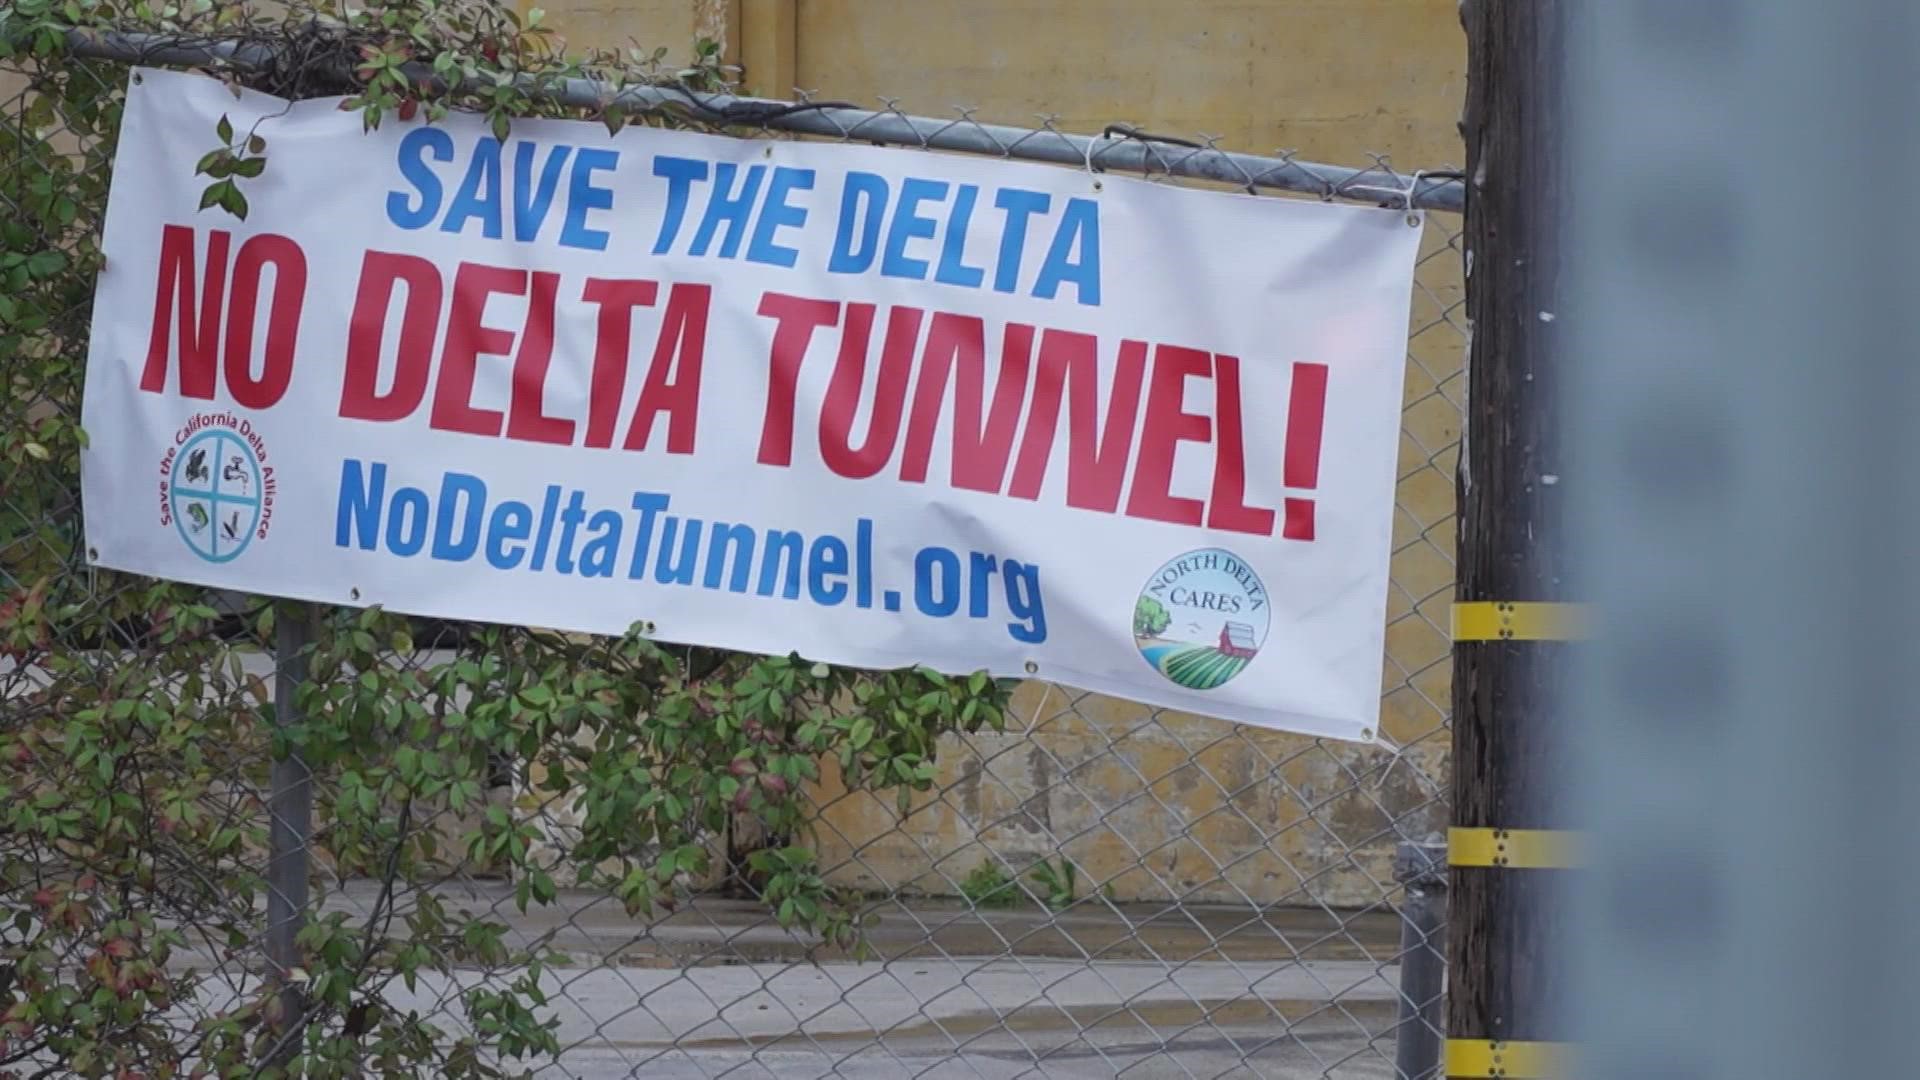 Gov. Newsom and DWR have promoted the Delta Tunnel project as a better way to capture, move and store water; opponents call it a "water grab"